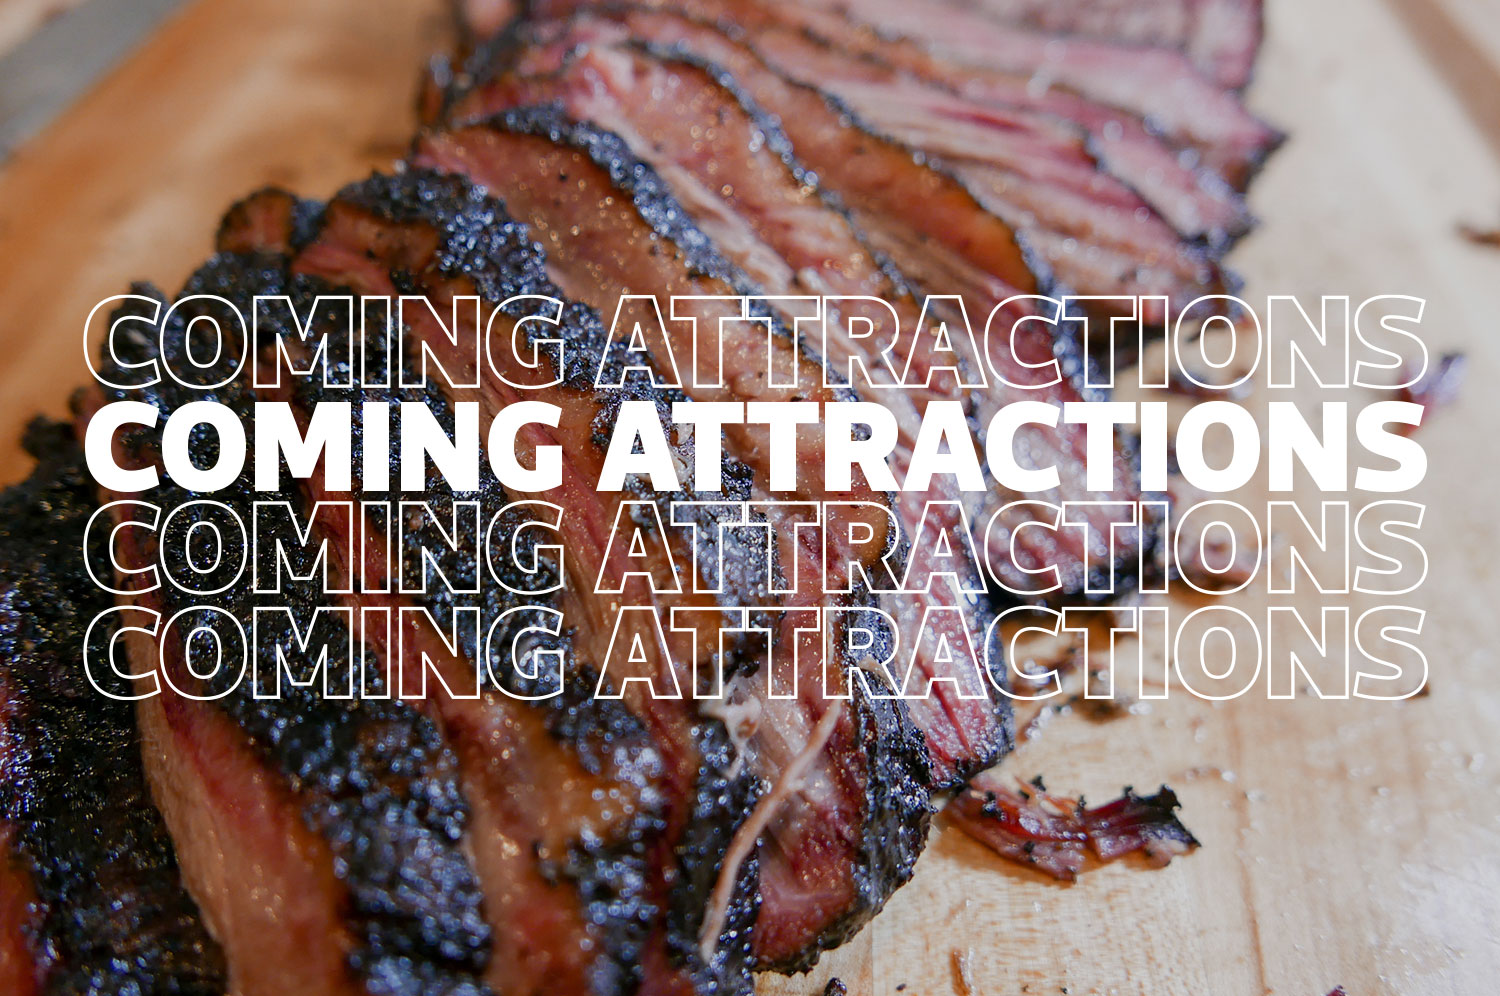 The text “Coming Attractions” superimposed over a close-up photo of sliced smoked meat.